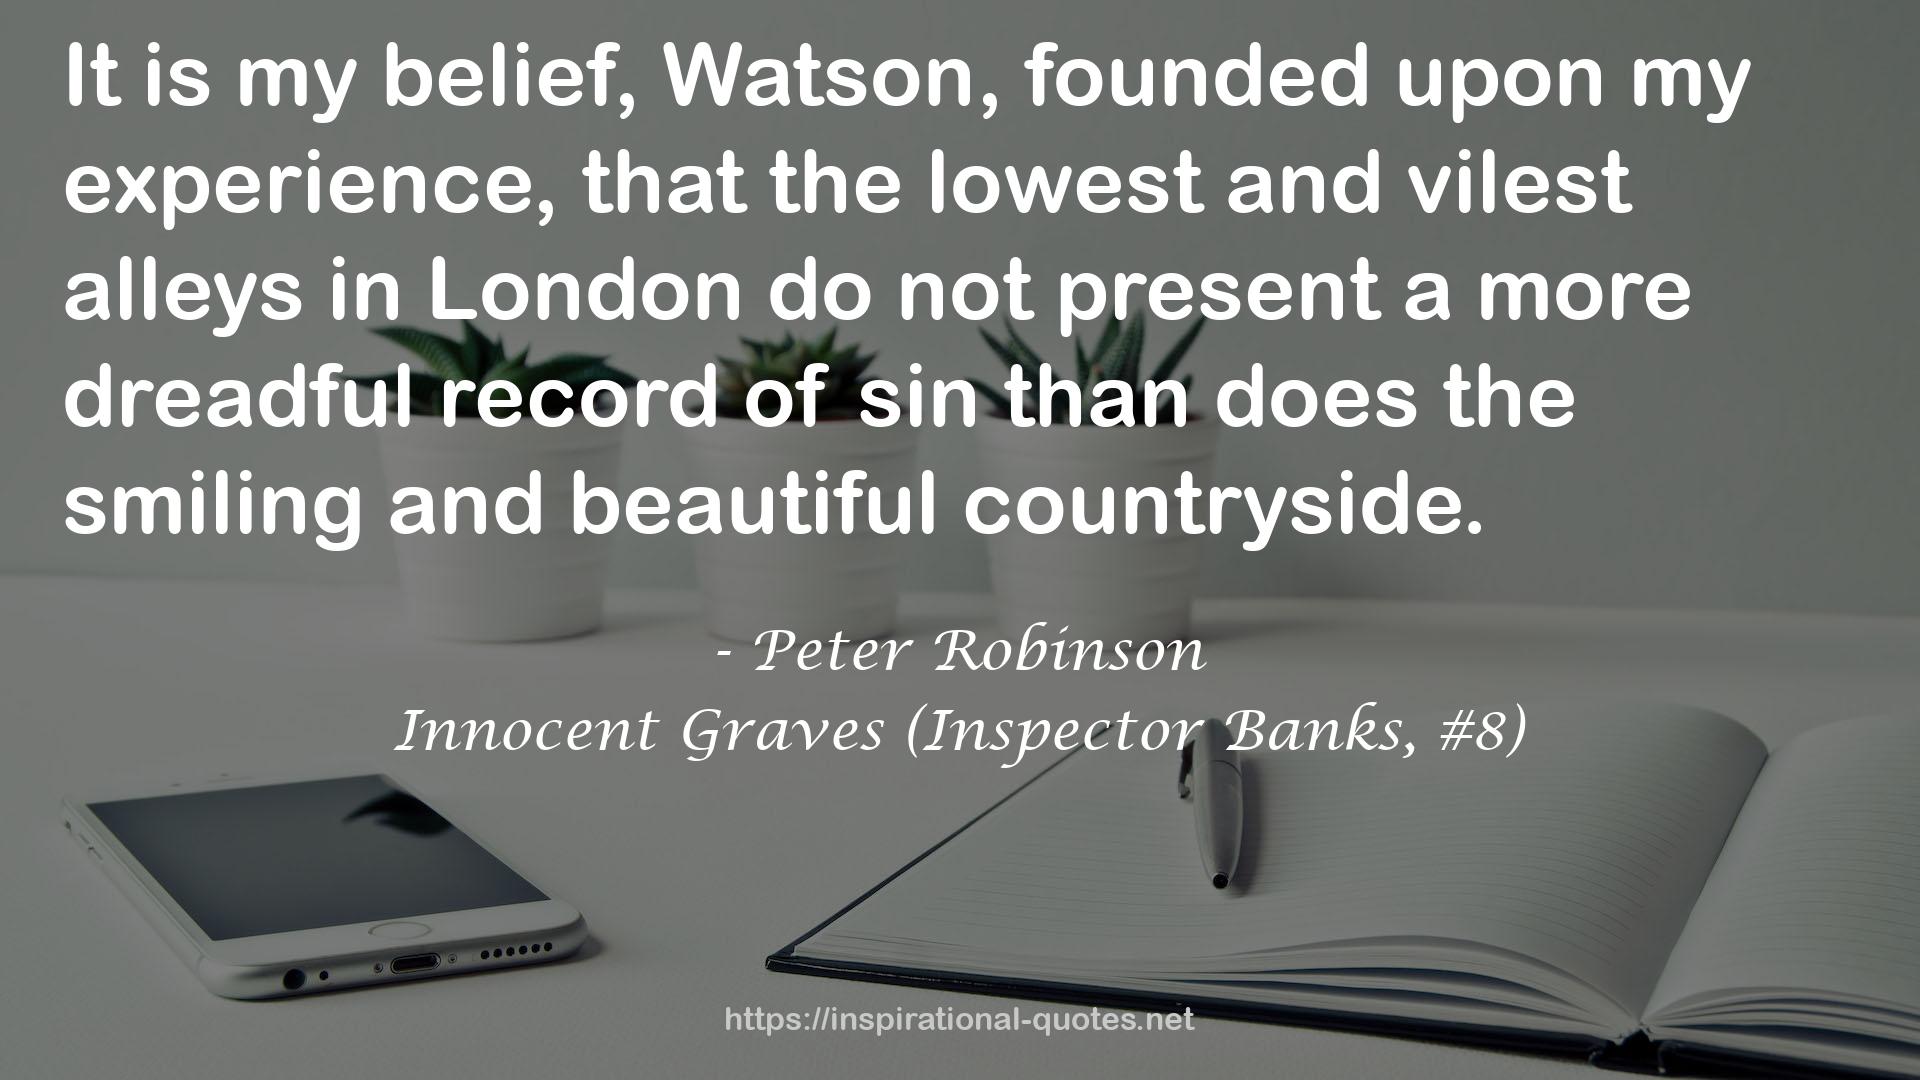 Peter Robinson QUOTES